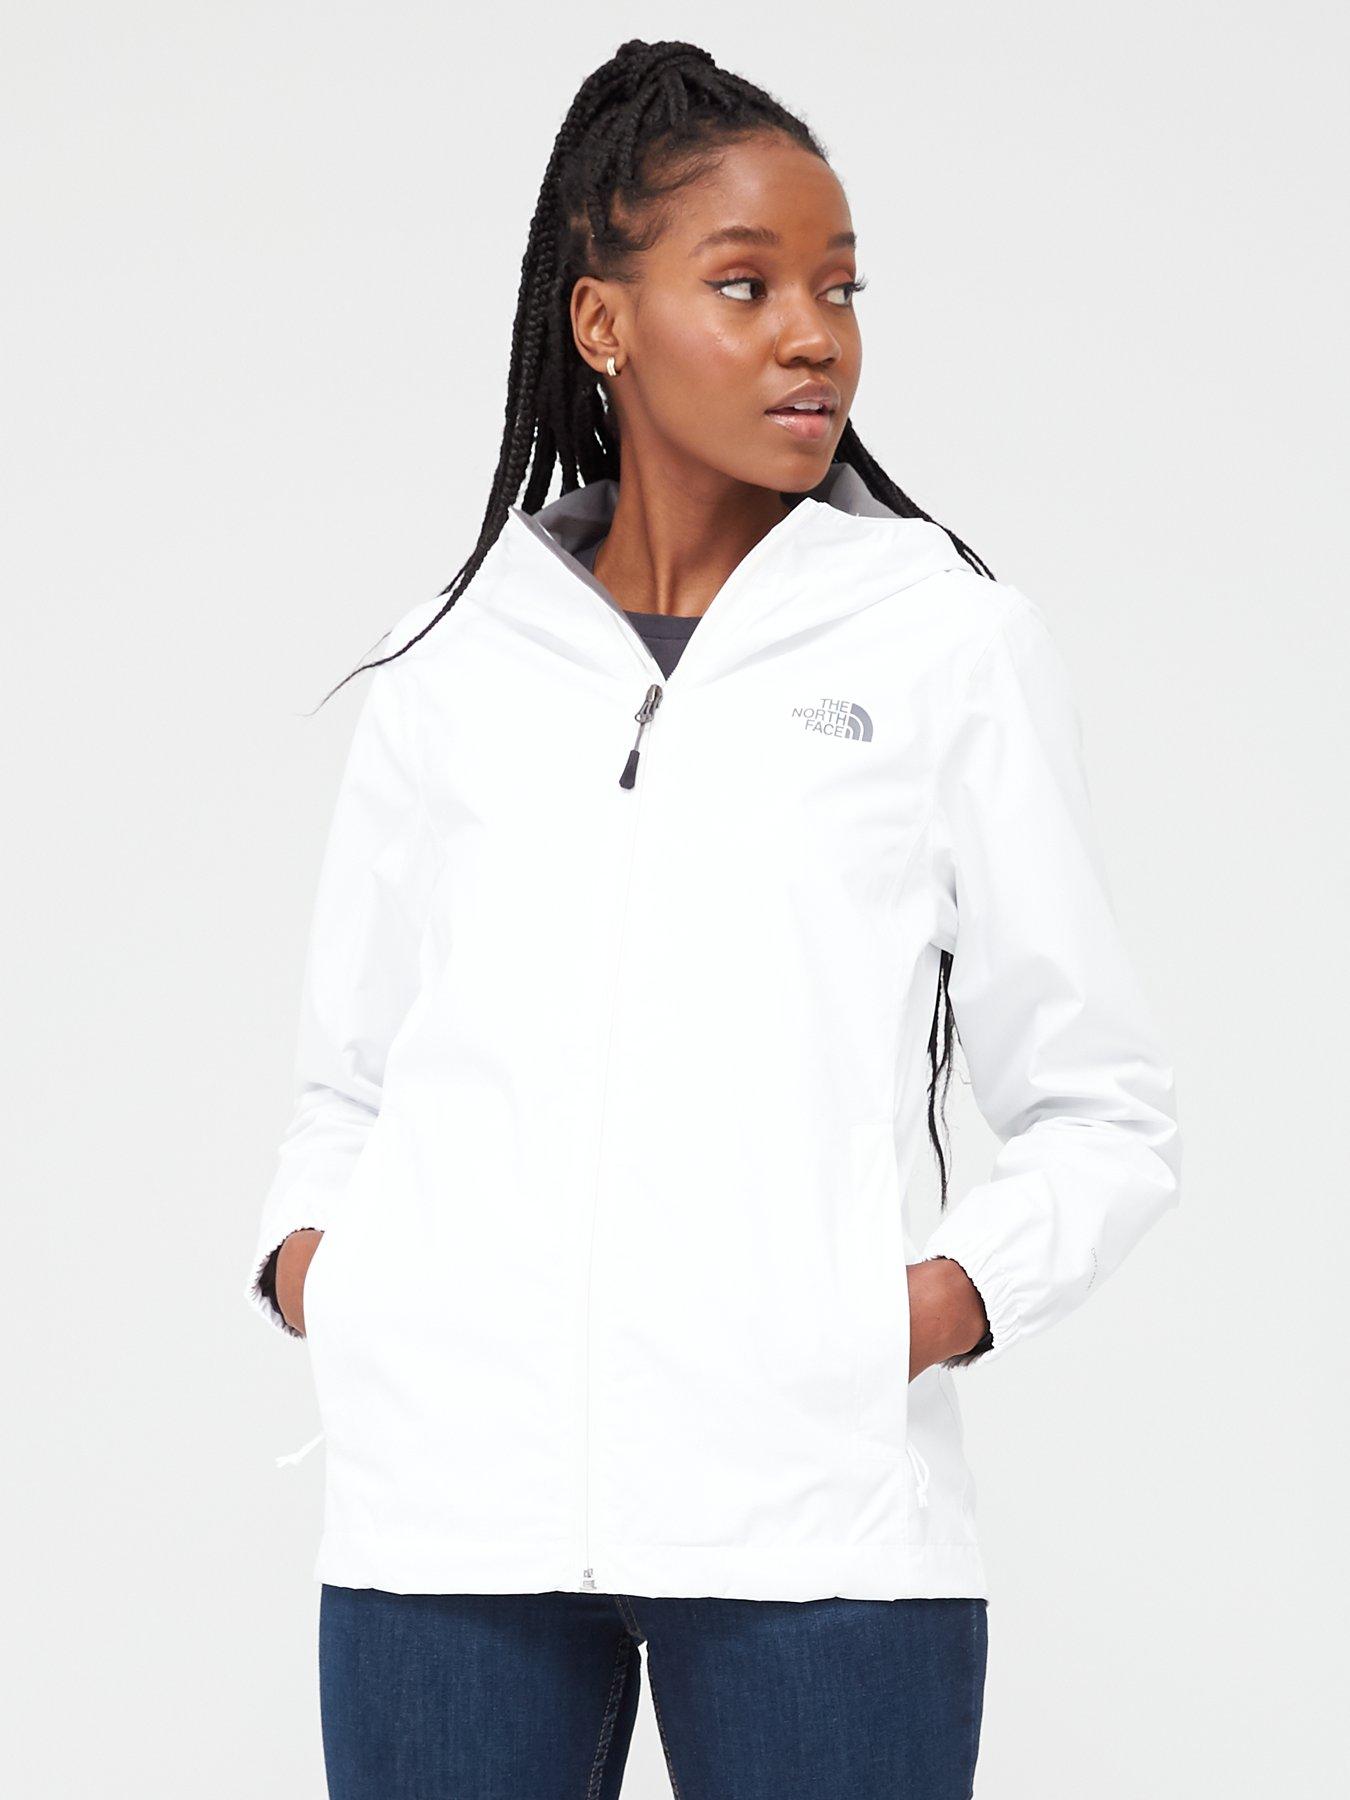 north face quest jacket womens grey